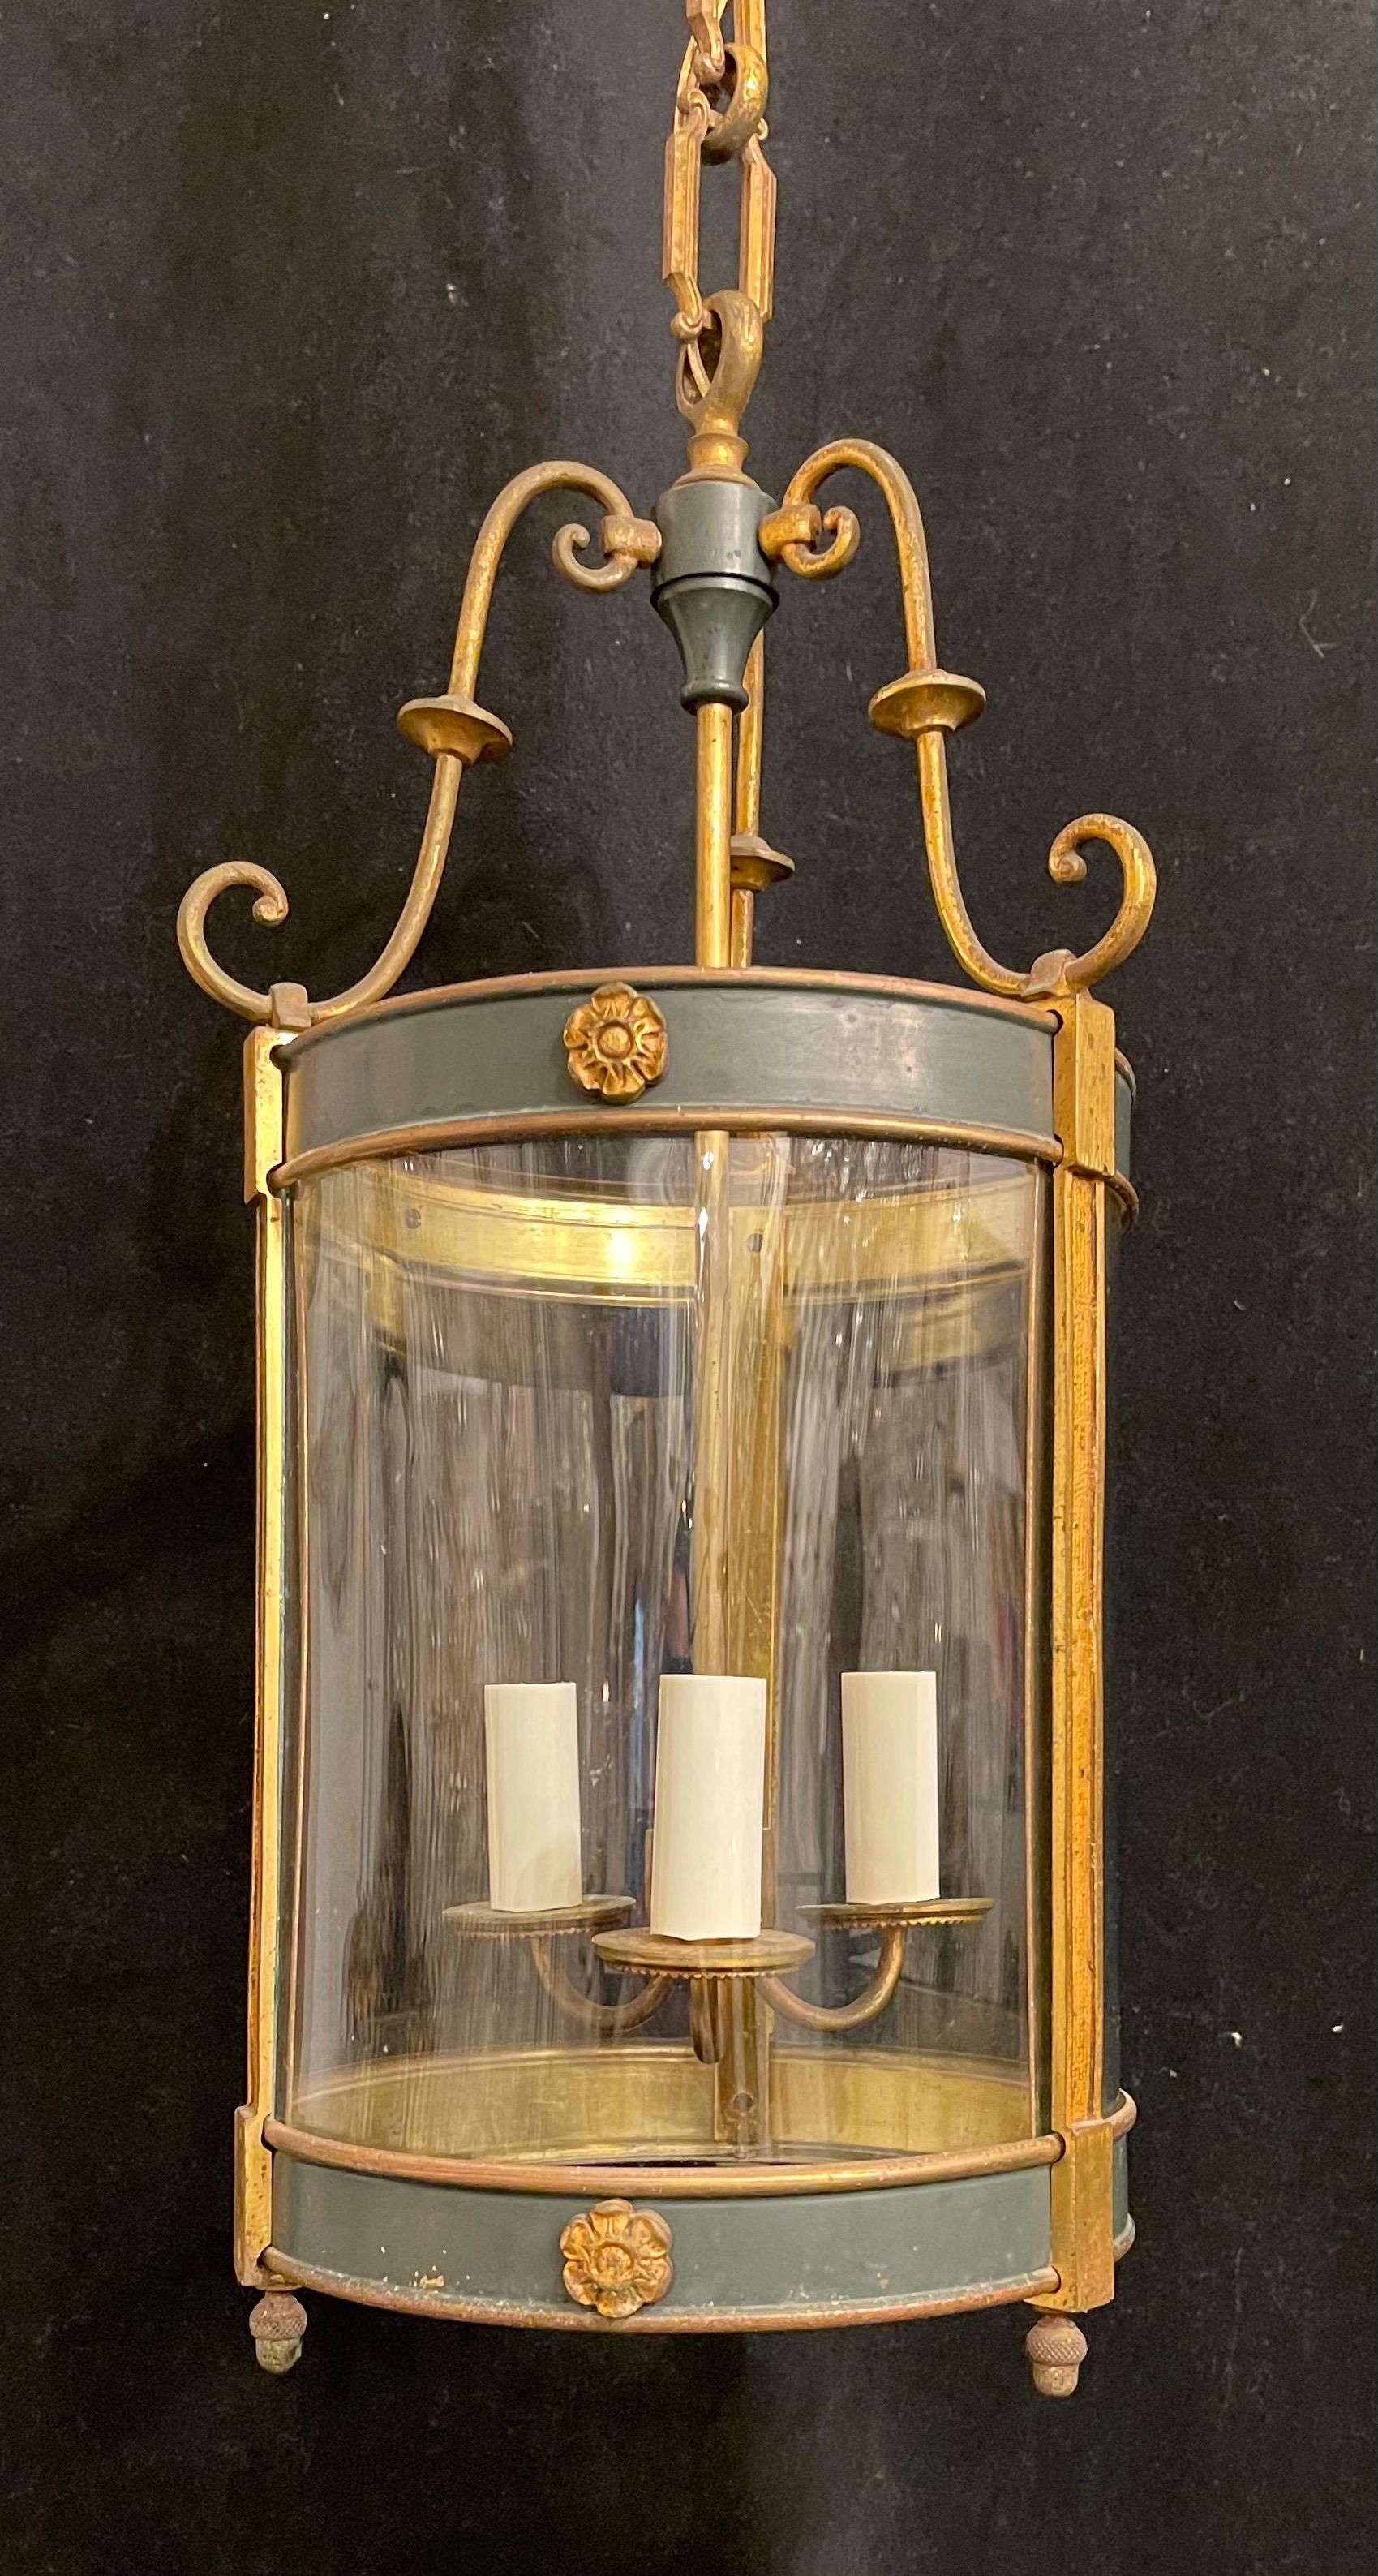 A wonderful French Empire neoclassical ormolu bronze and bent glass 3 candelabra light lantern fixture completely rewired with new sockets.